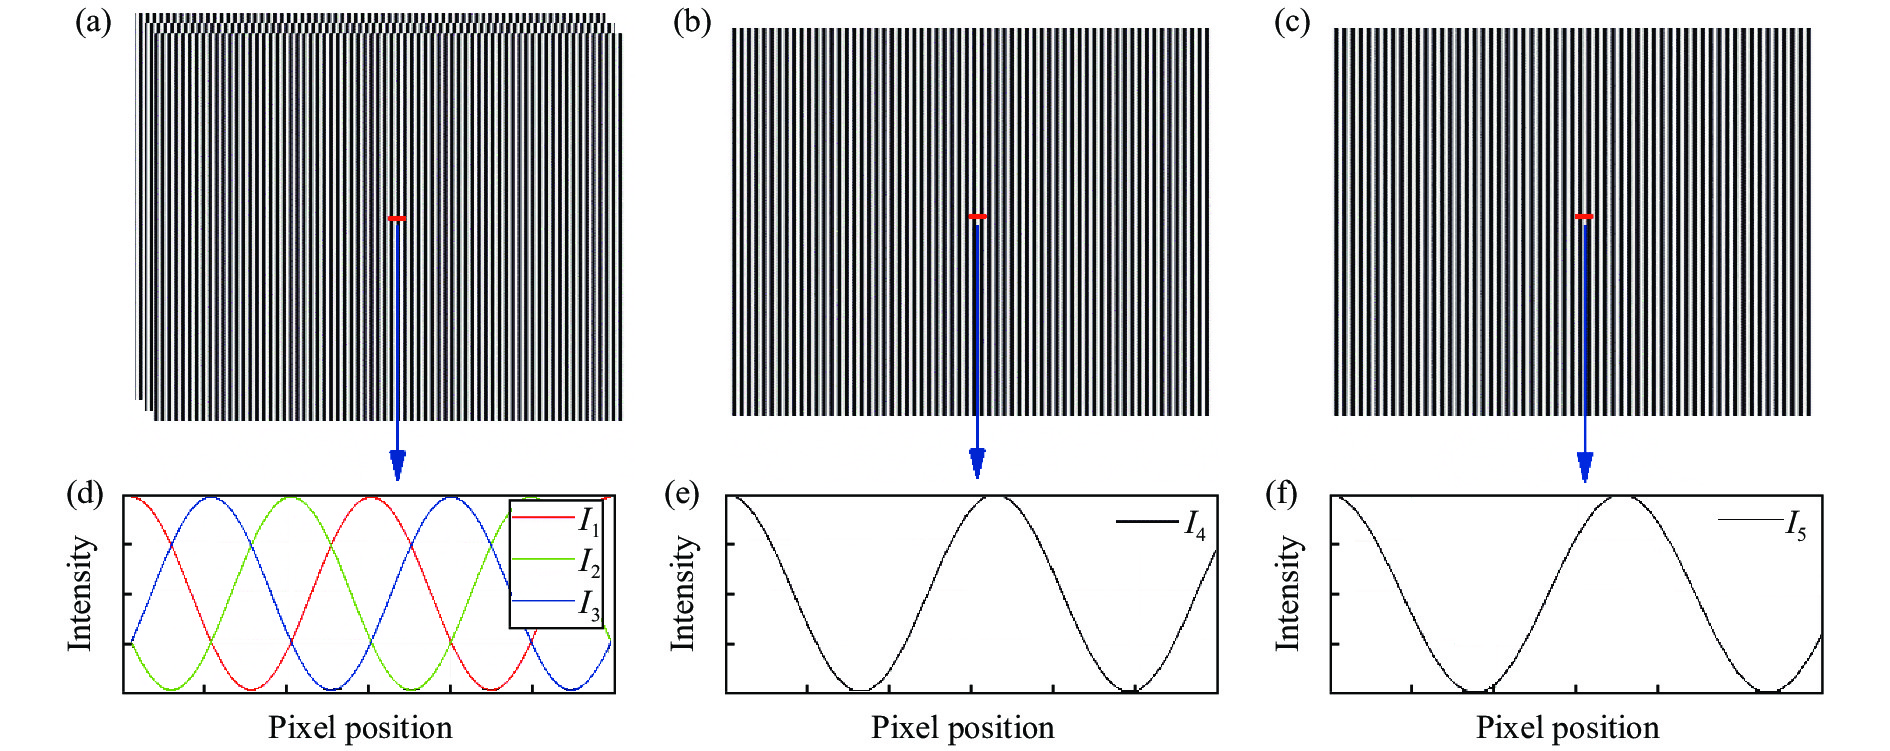 Projected five sinusoidal fringe patterns. (a) Three sinusoidal fringe patterns ,, and with frequency ; (b) Sinusoidal fringe pattern with frequency ; (c) Sinusoidal fringe pattern with frequency ; (d)-(f) Intensity at the red line pixel position in Fig. 1(a)-(c) respectively投影的5张正弦条纹图。（a）频率为的3张正弦条纹图；（b）频率为的正弦条纹图；（c）频率为的正弦条纹图；（d）~（f）图1（a）~（c）中红色划线像素位置的光强值